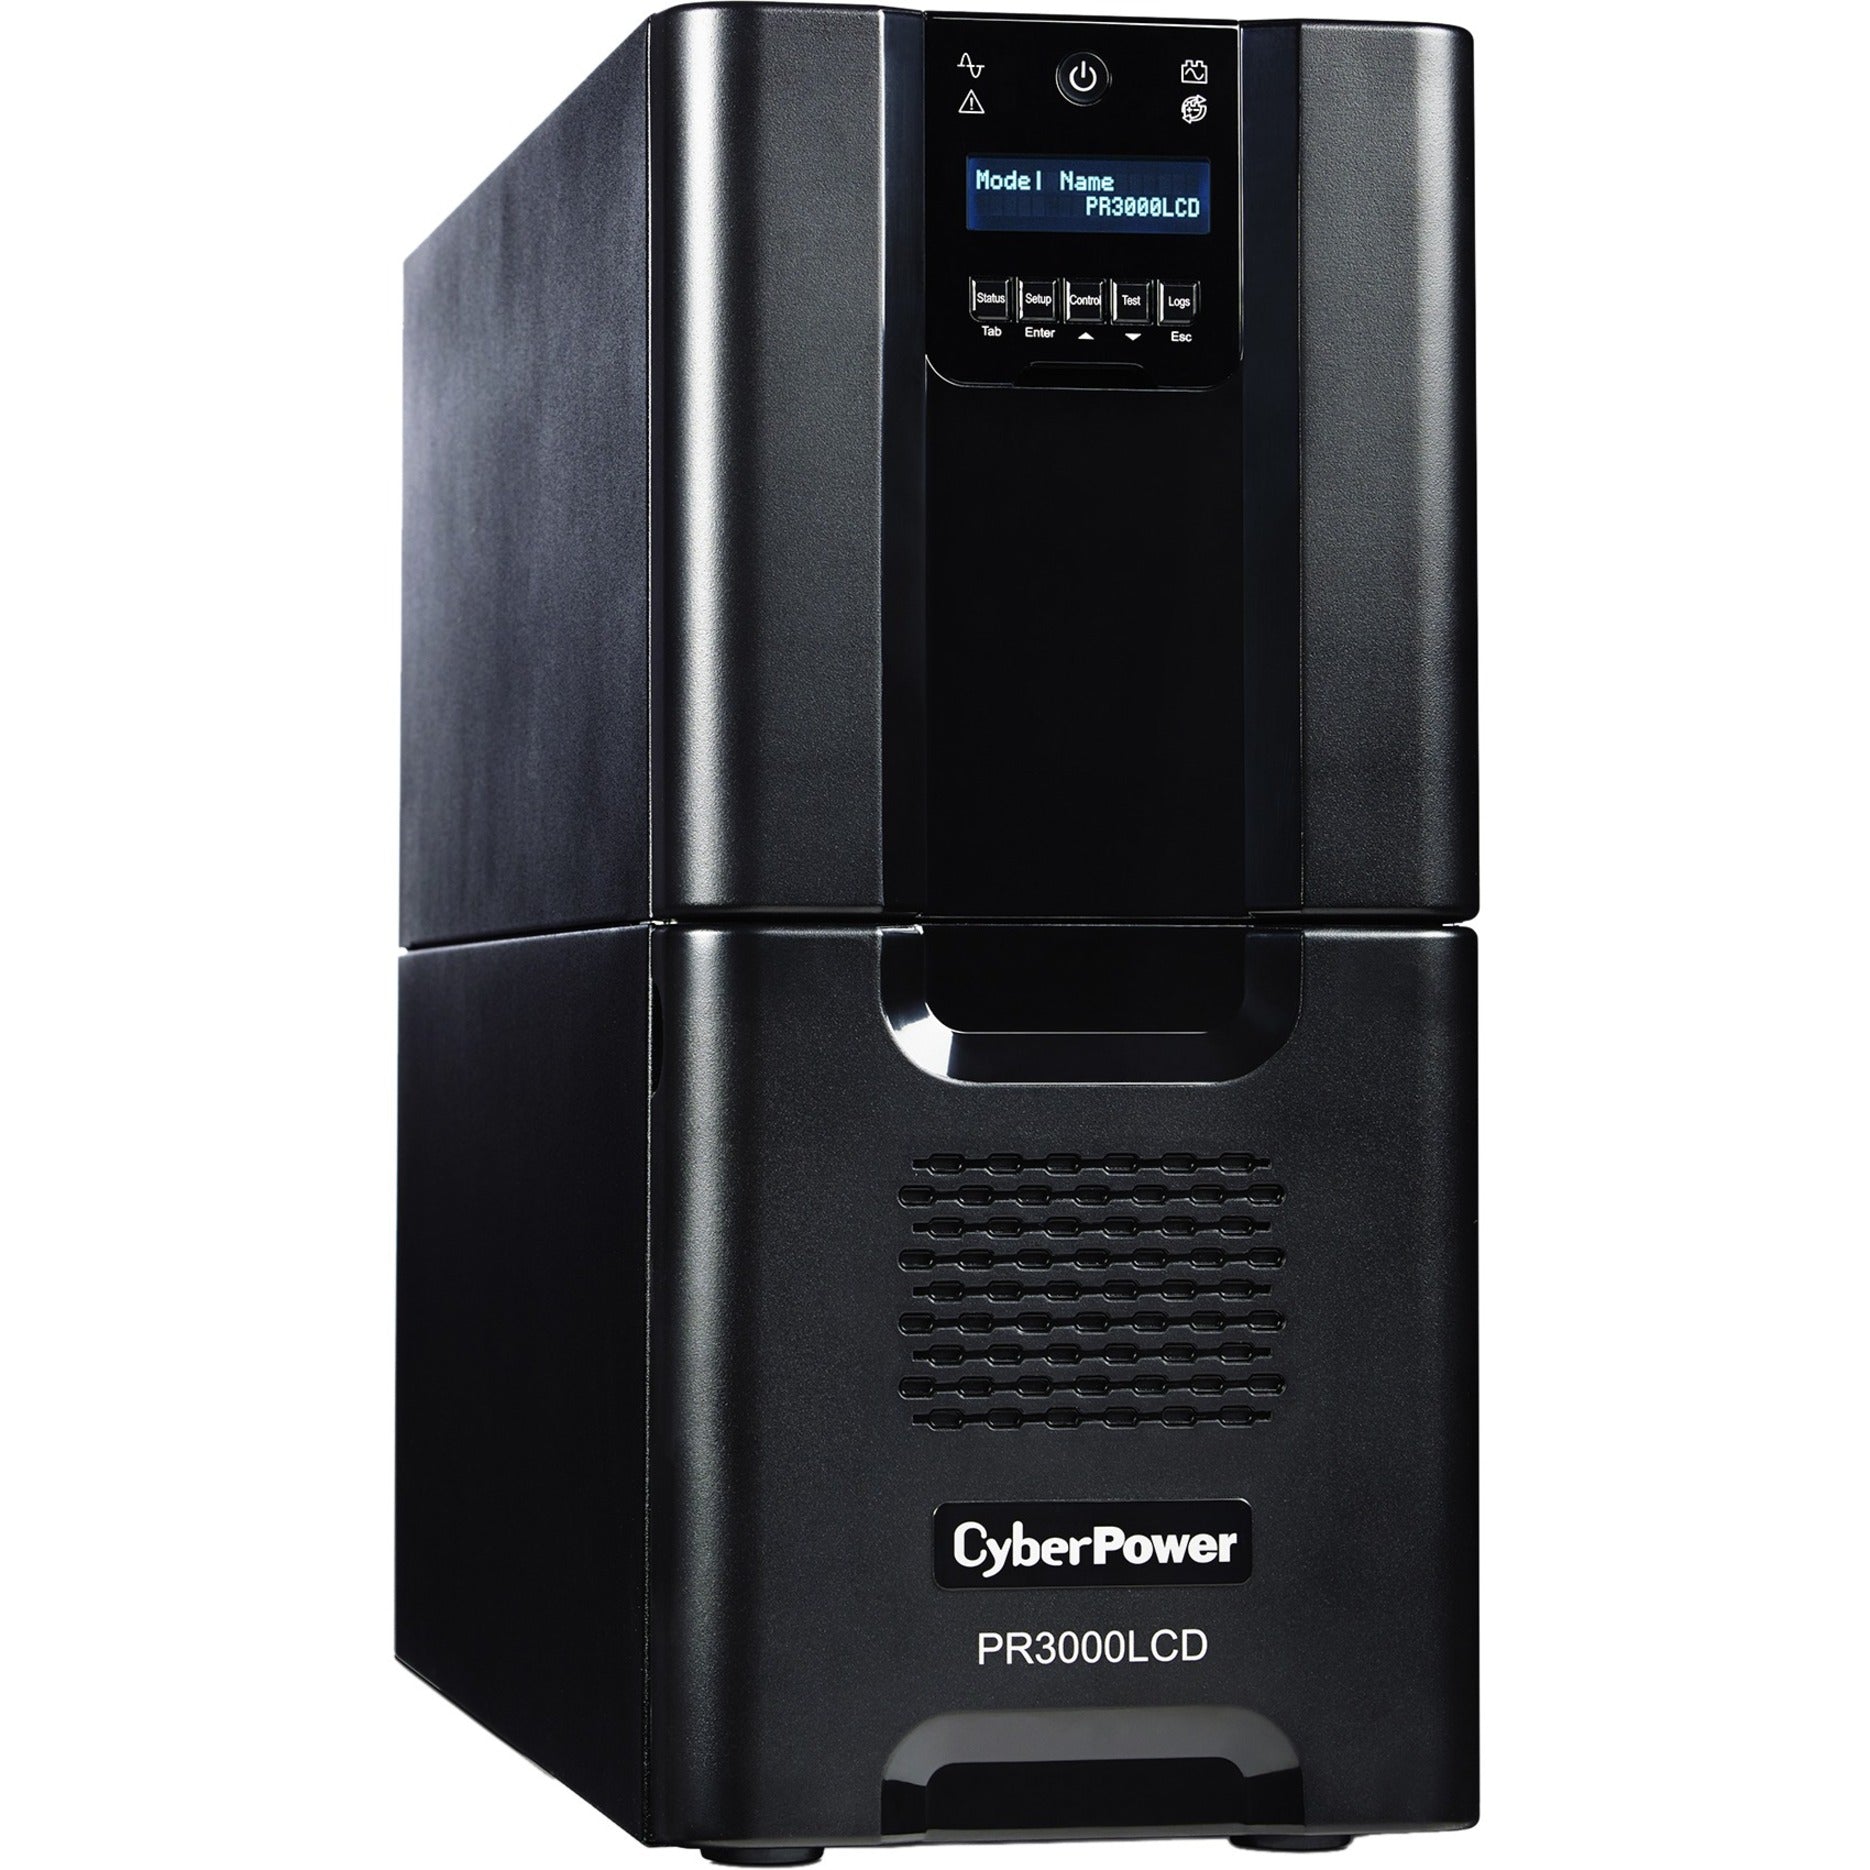 CyberPower PR3000LCD Smart App Sinewave UPS Systems, 3000VA Pure Sine Wave Tower LCD UPS